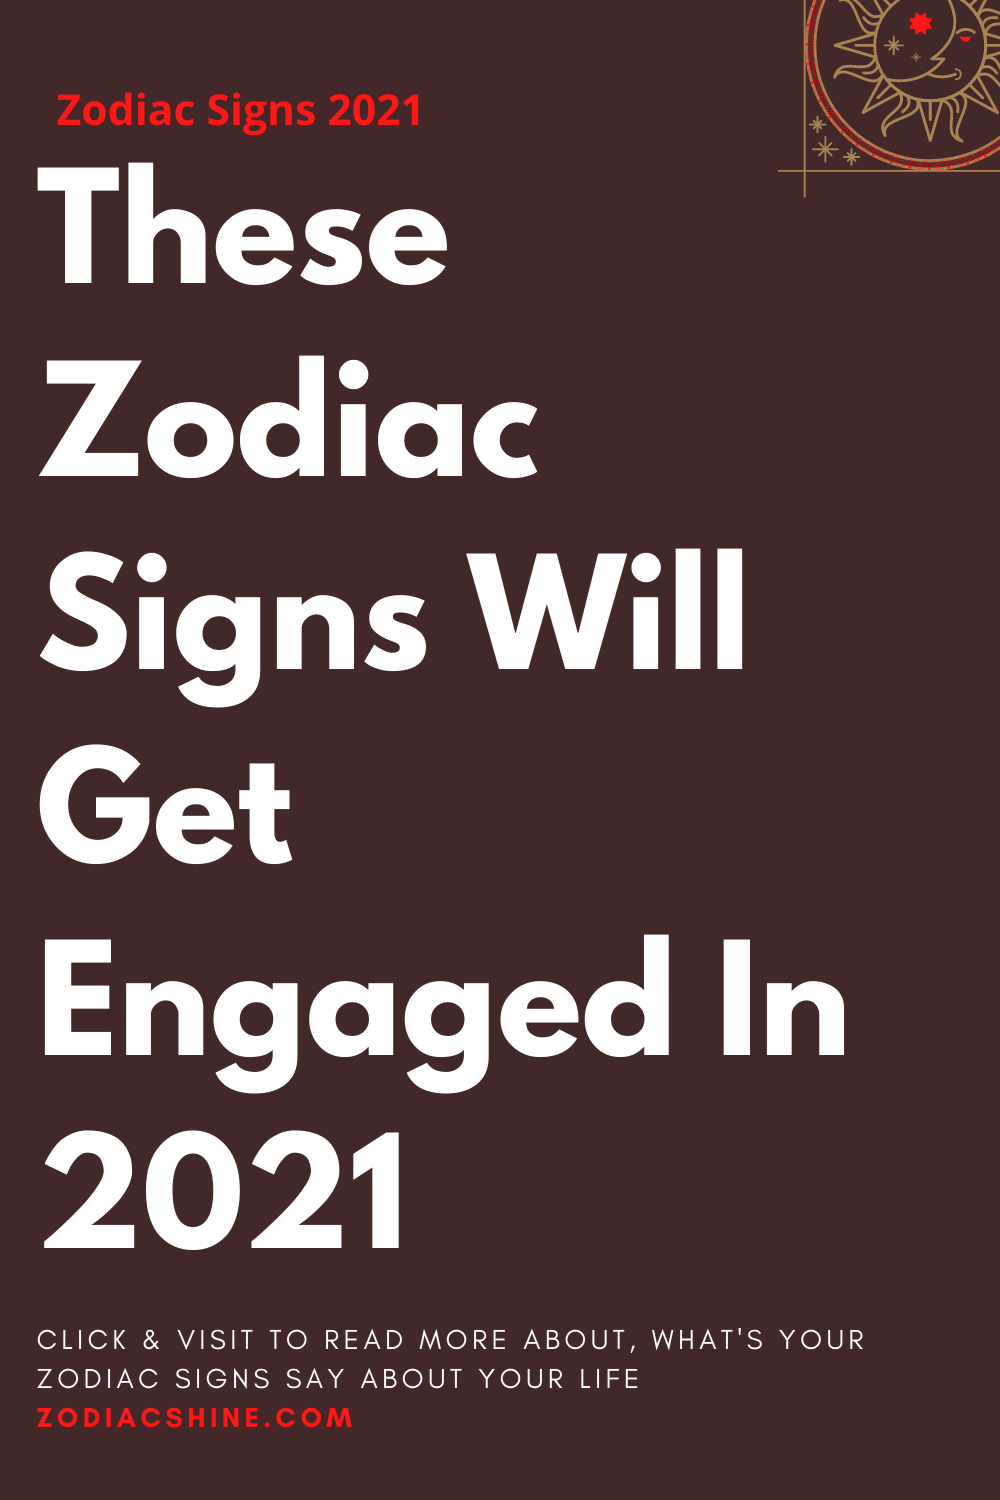 These Zodiac Signs Will Get Engaged In 2021